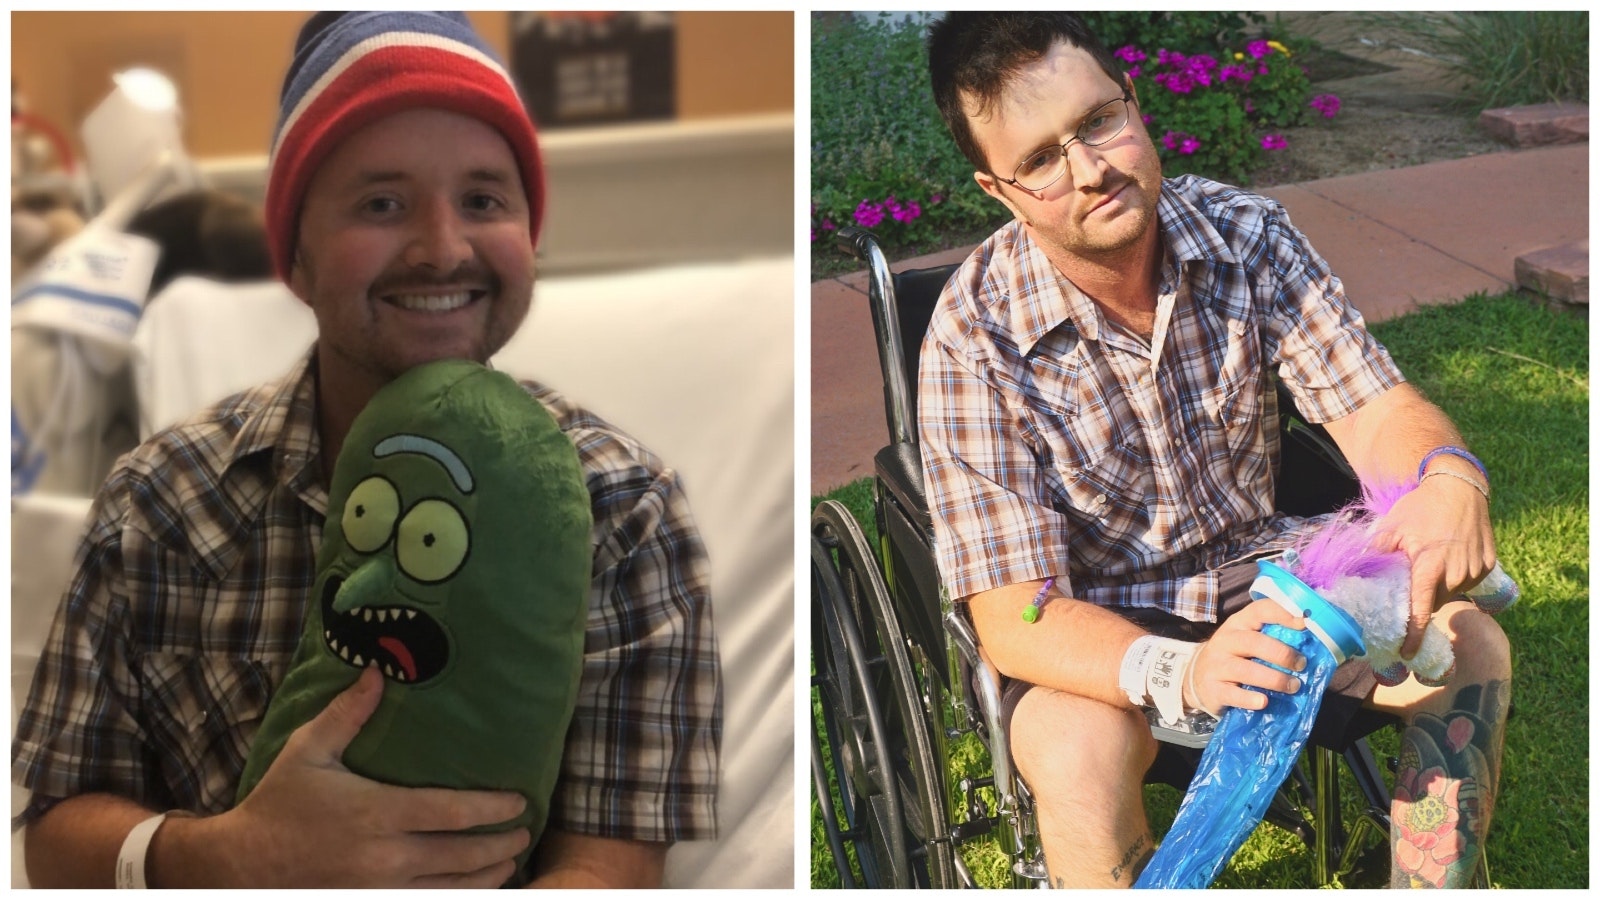 Left: Nathan Kissack holding Pickle Rick. He comes from what Kissack described as this "ridiculous animated show" called Rick and Morty. It was a gift from his girlfriend at the time, to sleep with when she wasn't there. Right: Nathan poses for a photo shoot outside the hospital the first time he had cancer. Kissack told Cowboy State Daily he knew what was coming, so he had a unicorn puking into a vomit bag they'd given him.